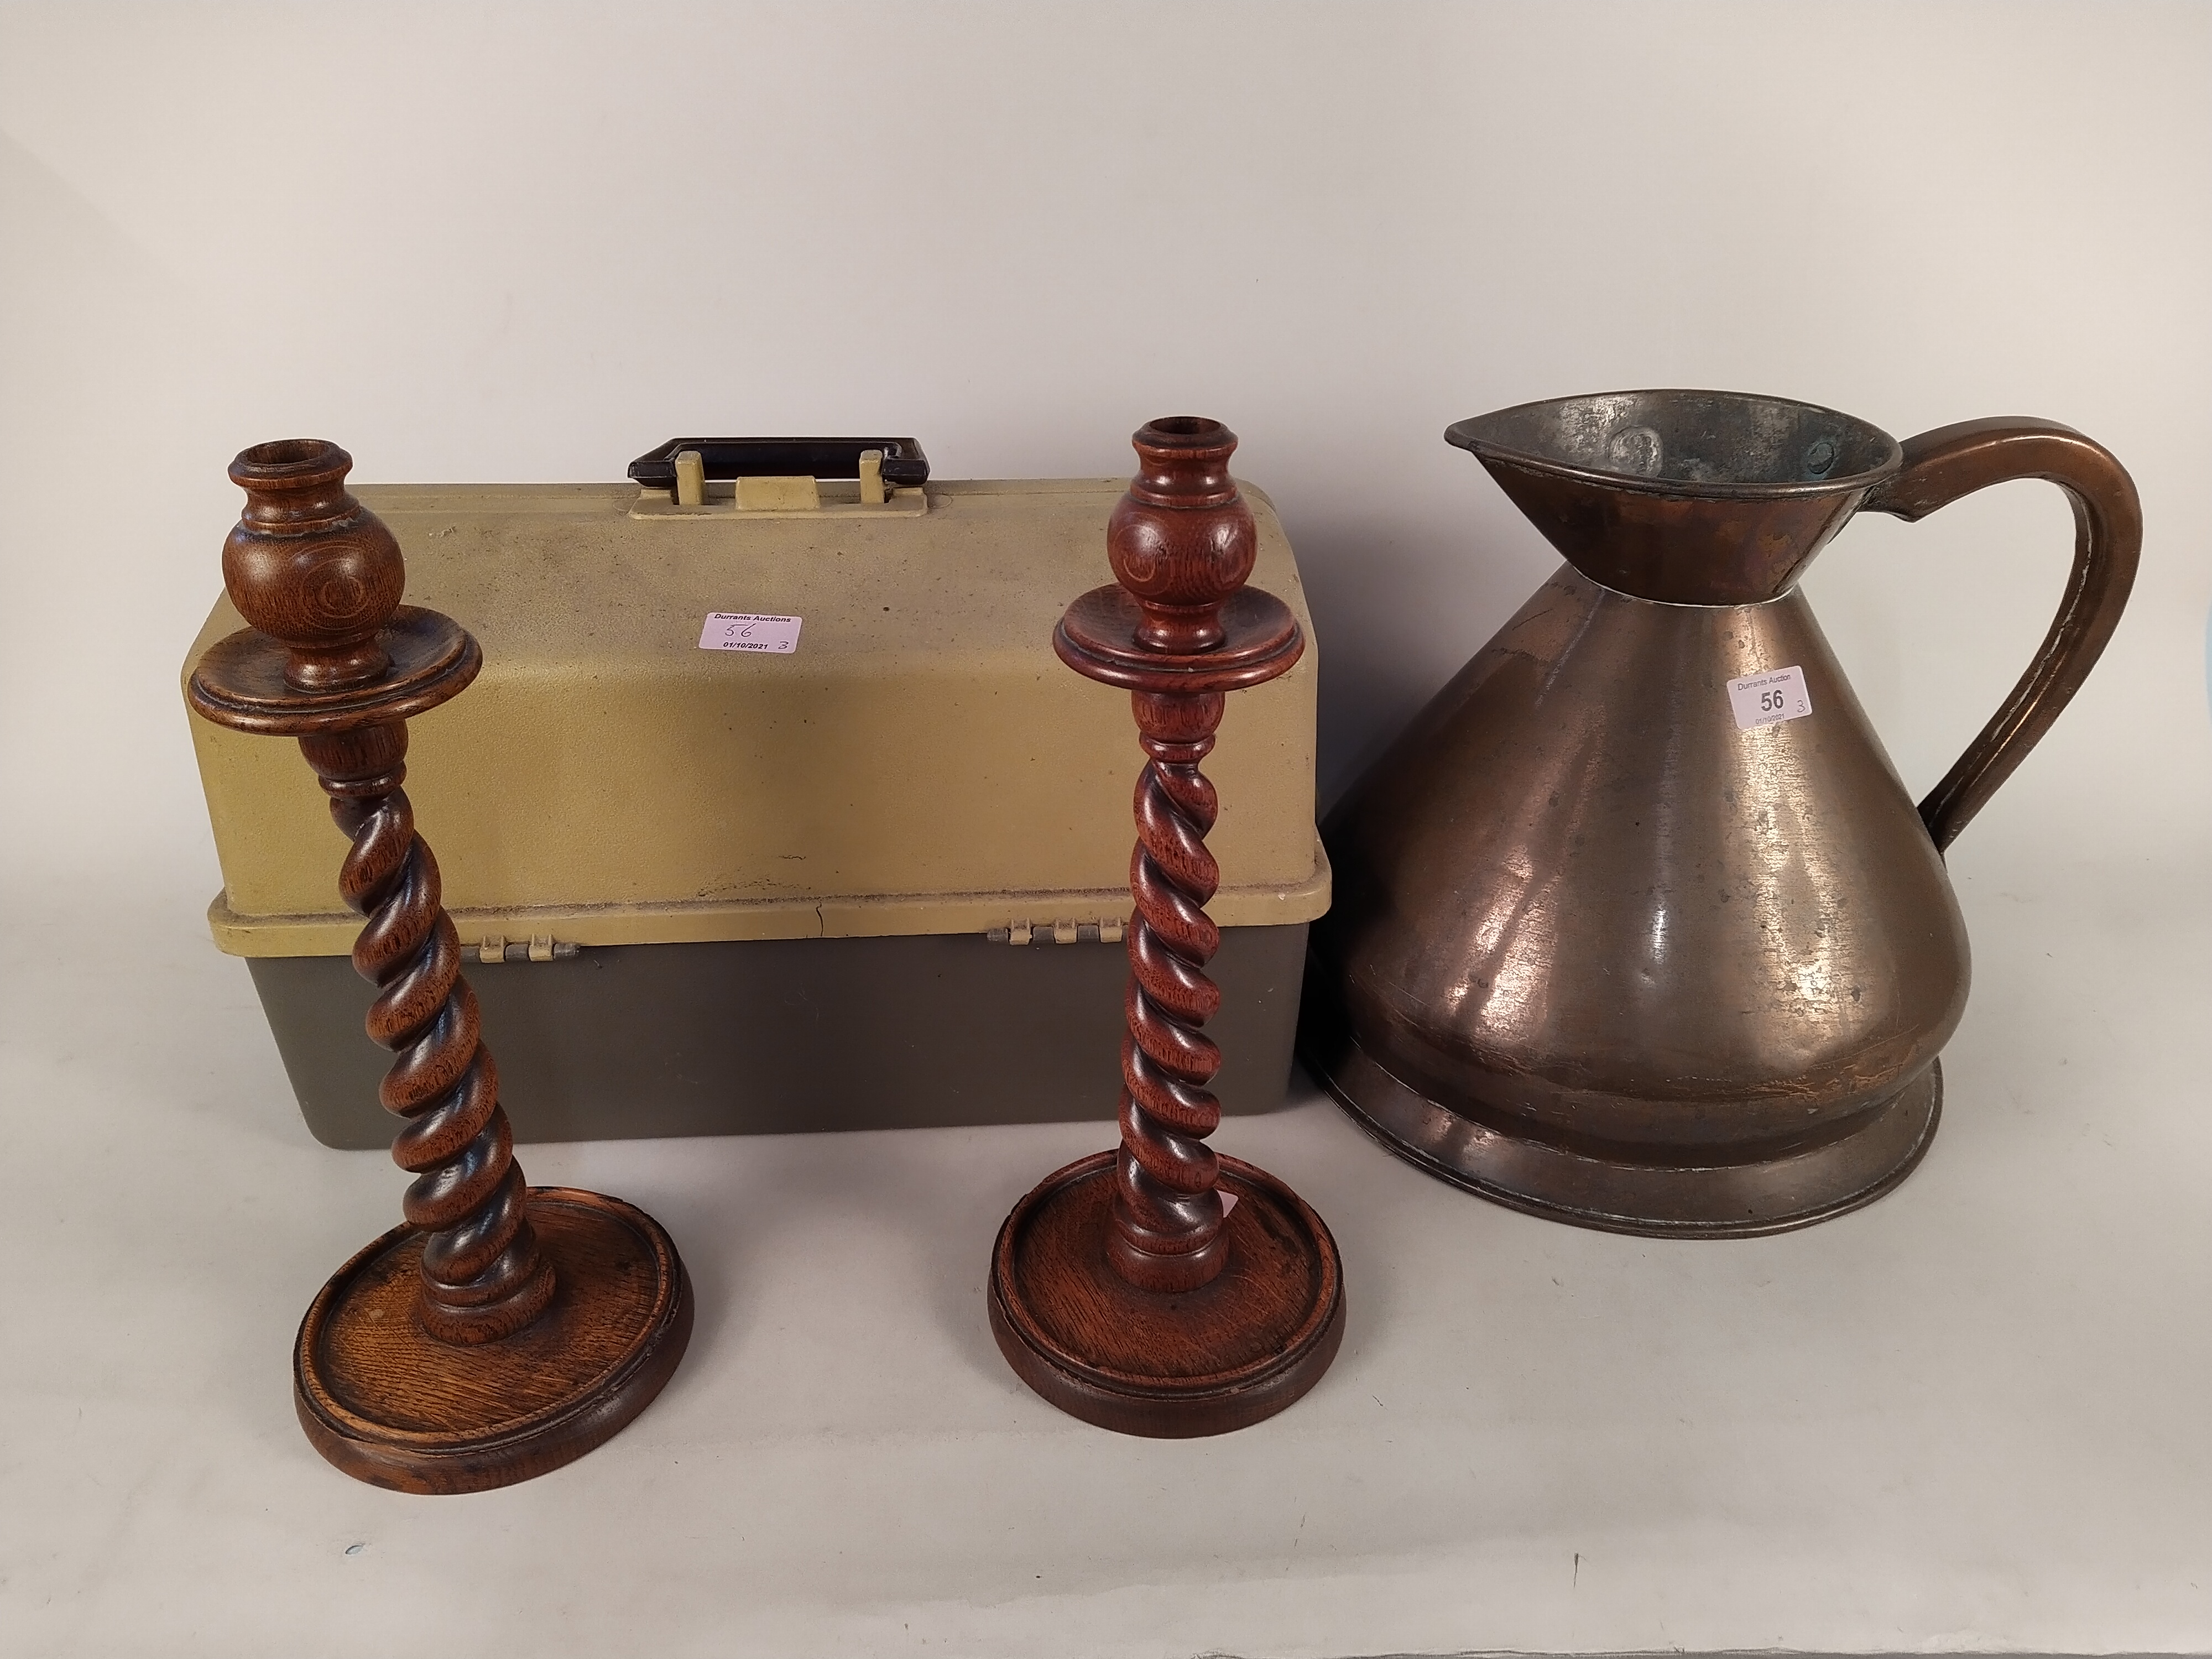 A pair of 1920's oak barley twist candlesticks, a copper jug stamped "2 gallons V.R.